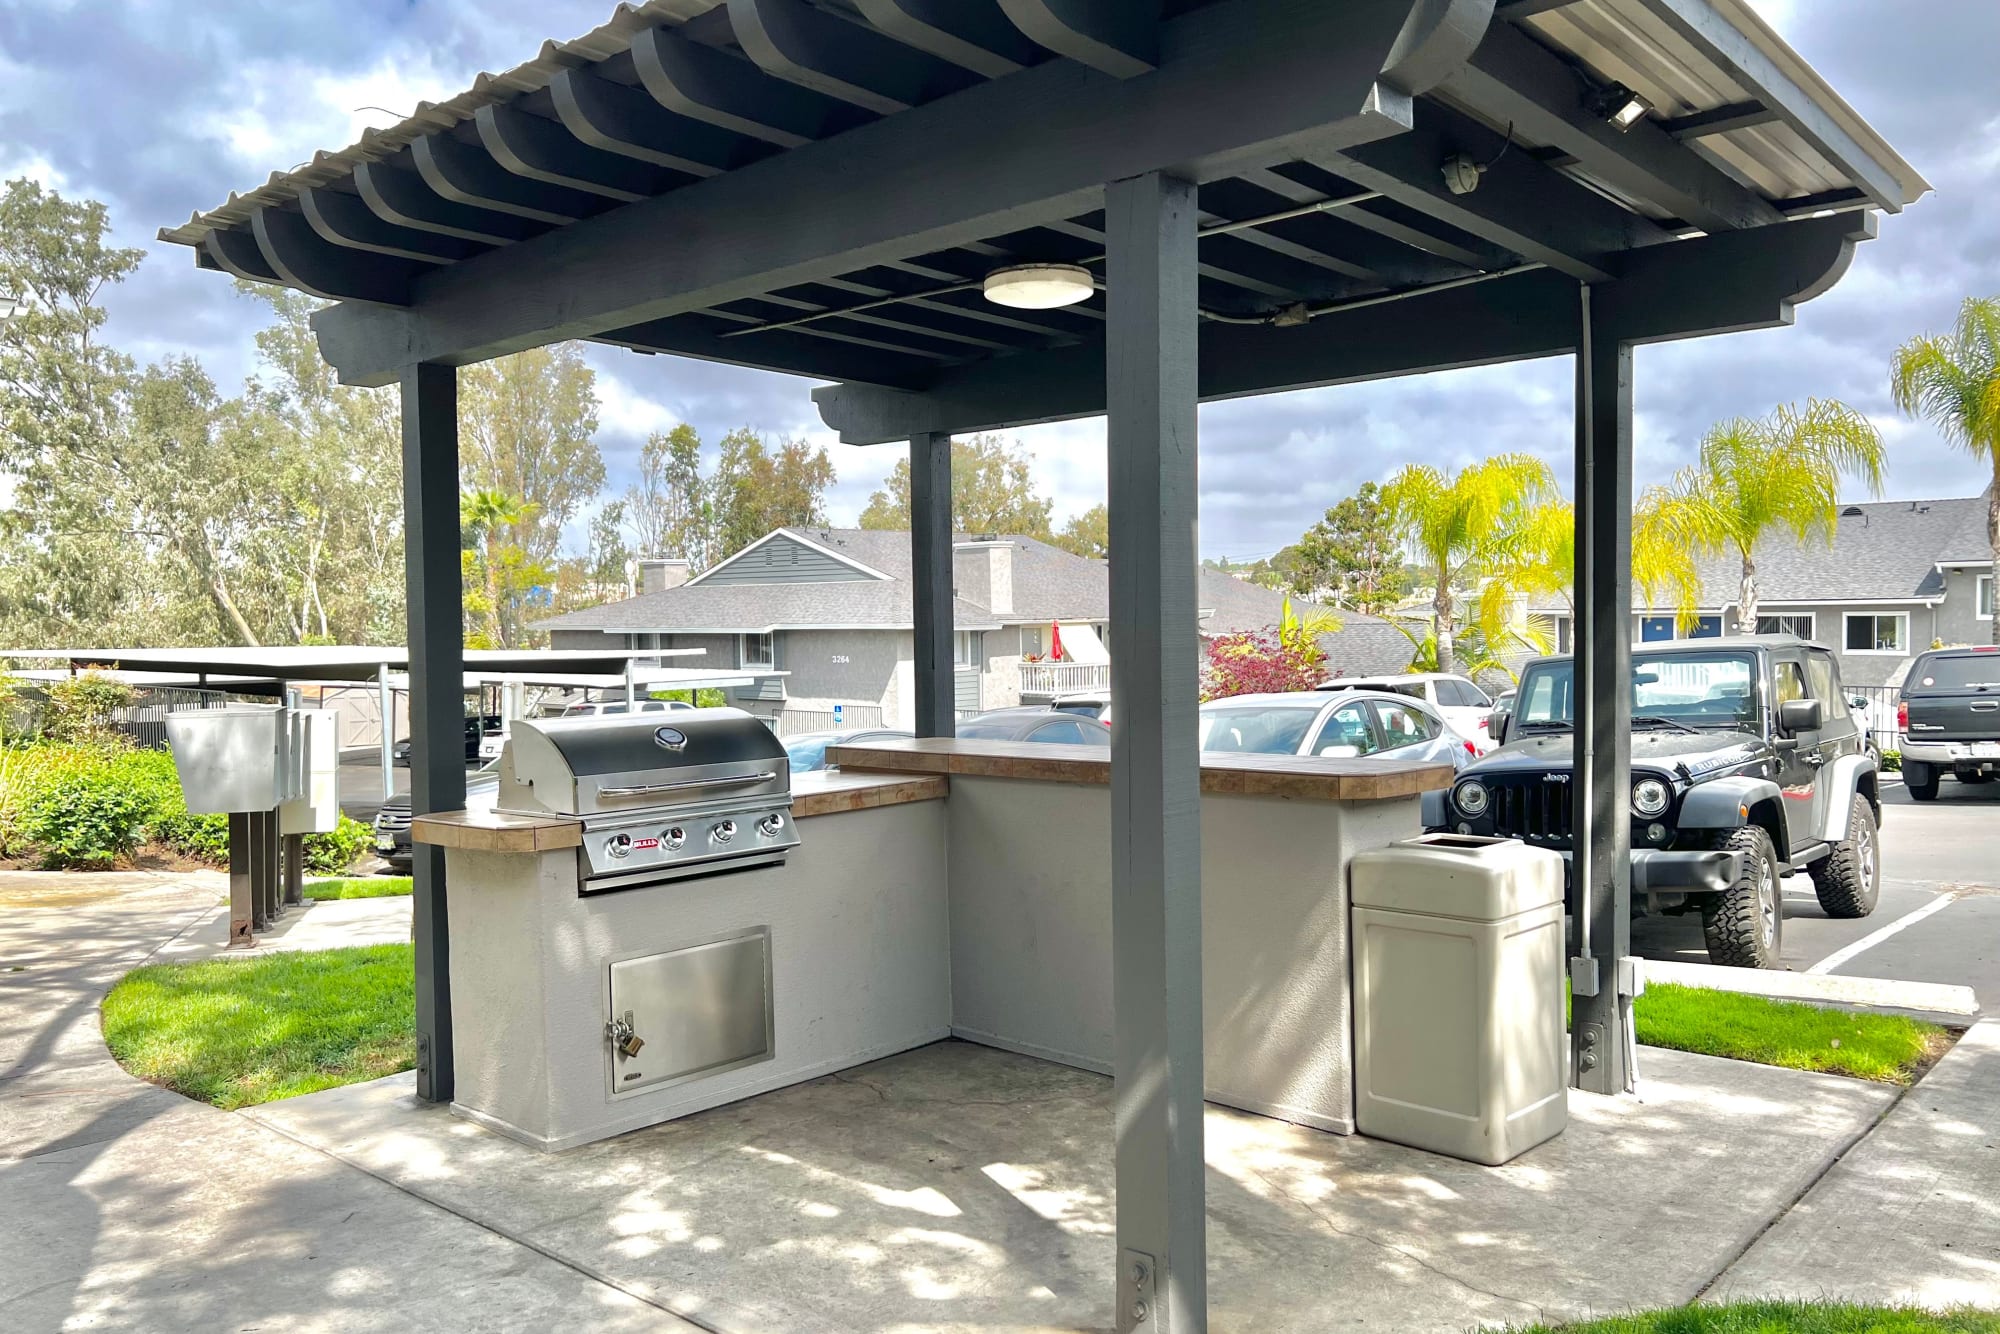 Covered outdoor BBQ area at Hillside Terrace Apartments in Lemon Grove, California